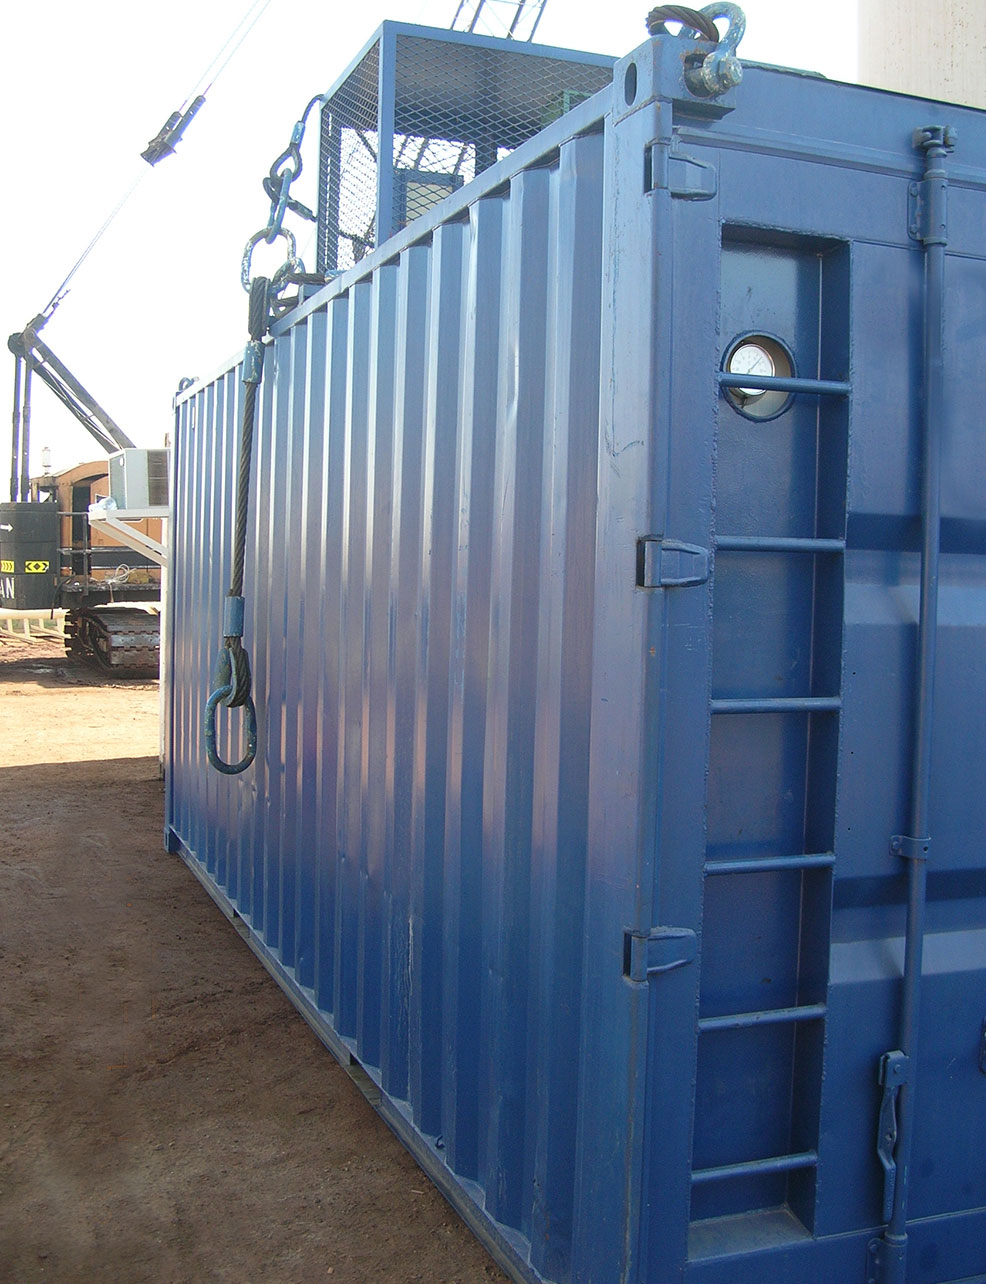 Refrigerated and specialised containers